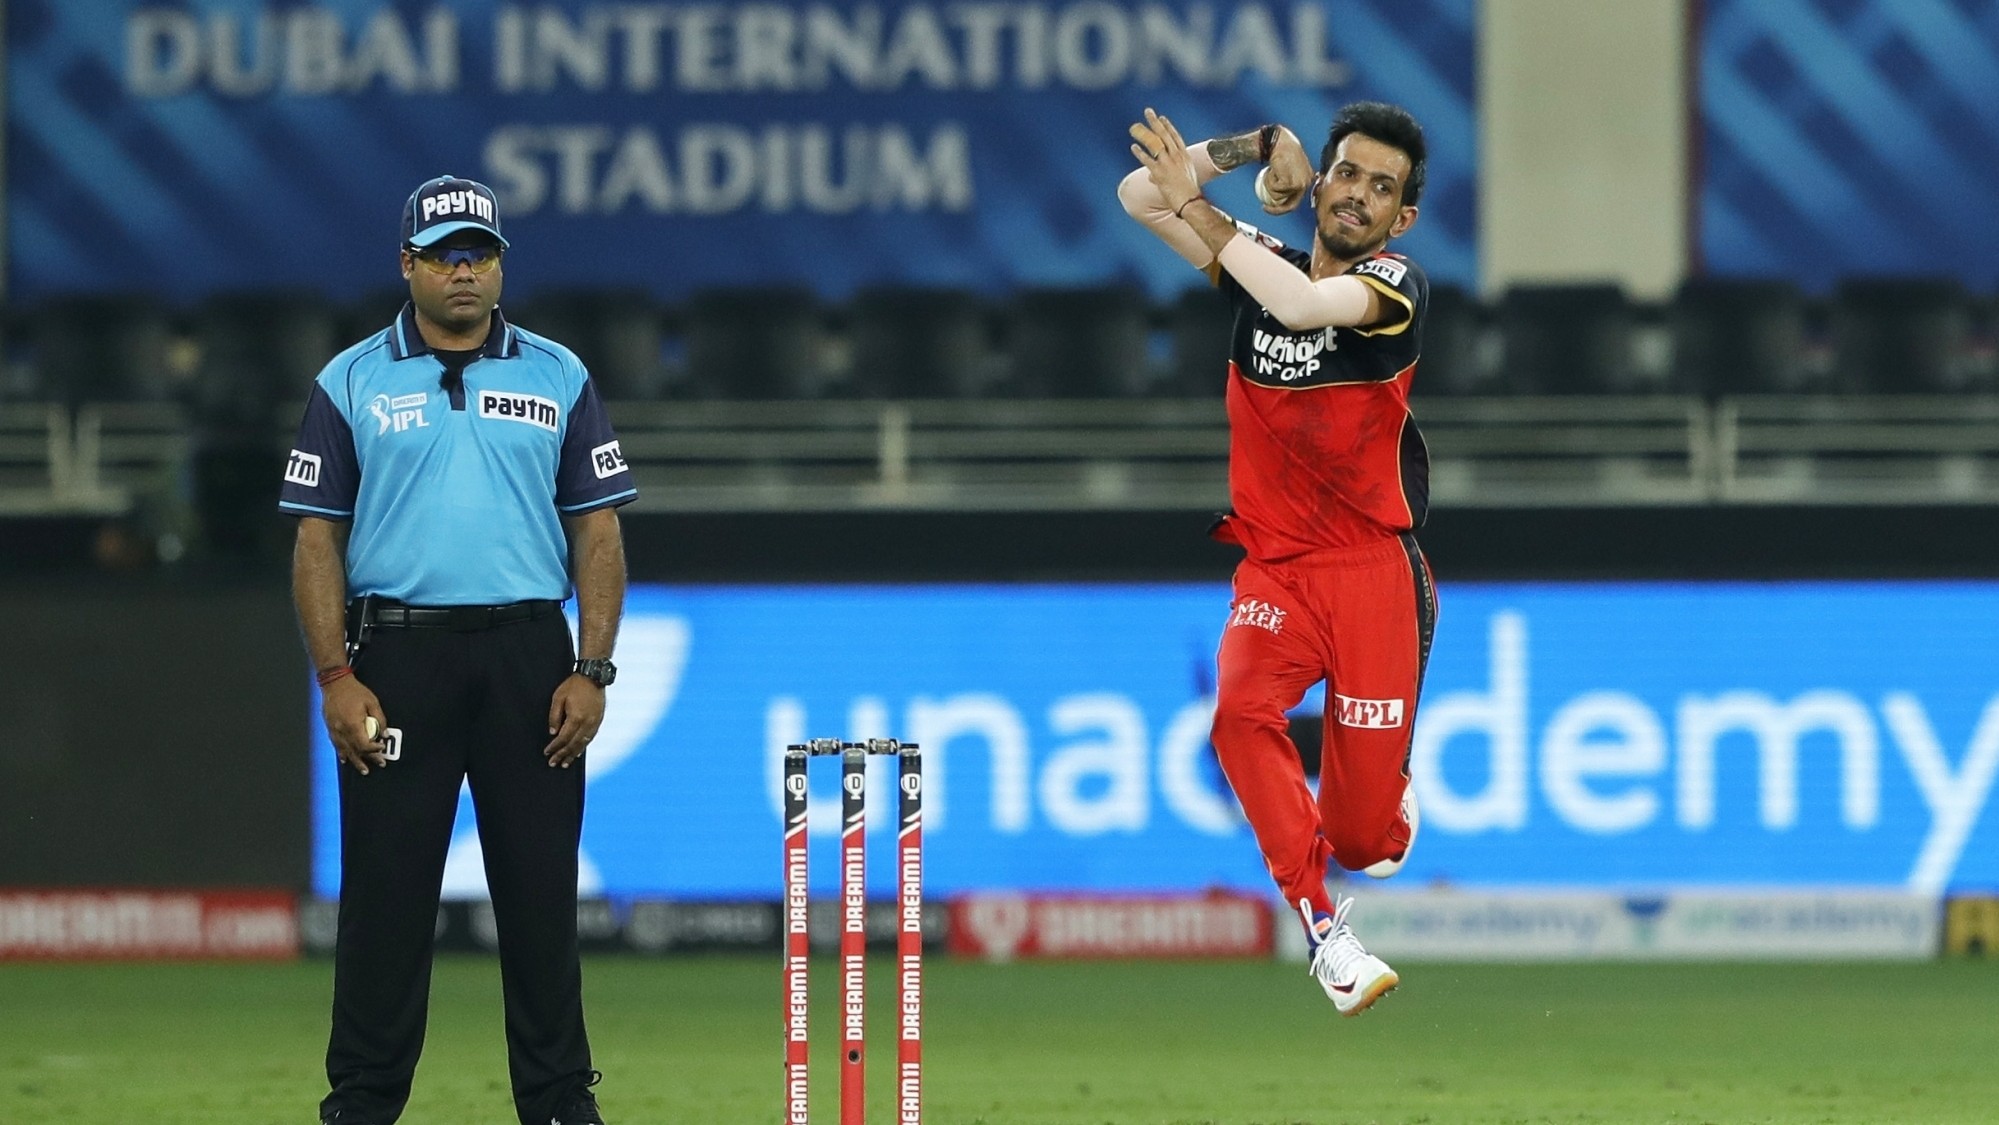 IPL 2020: Yuzvendra Chahal explains why it feels ‘heavenly’ playing the tournament in UAE